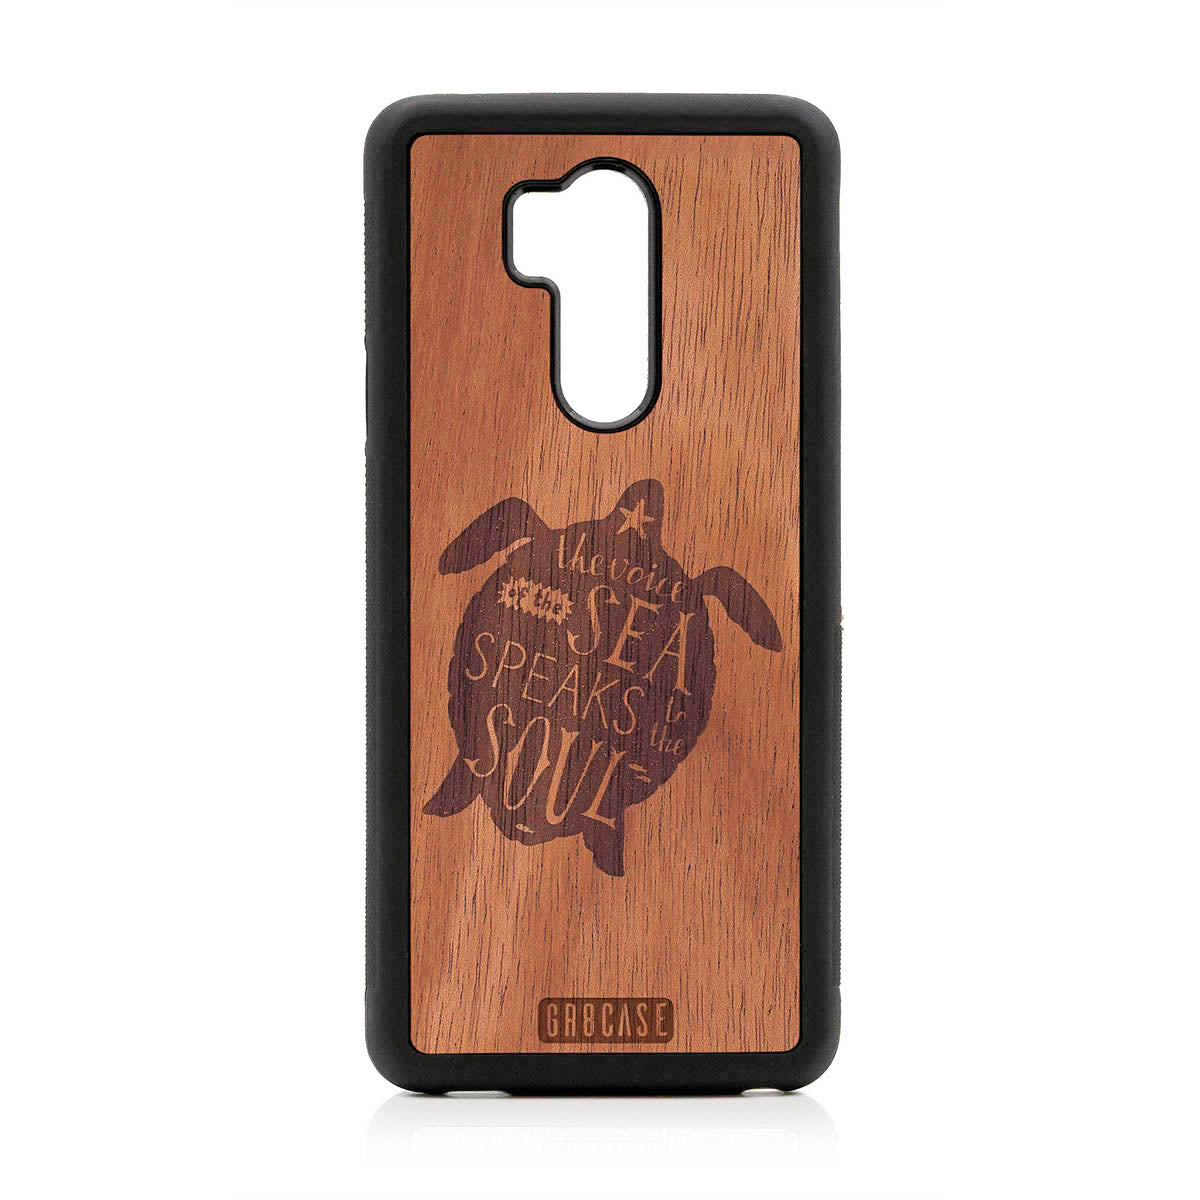 The Voice Of The Sea Speaks To The Soul (Turtle) Design Wood Case For LG G7 ThinQ